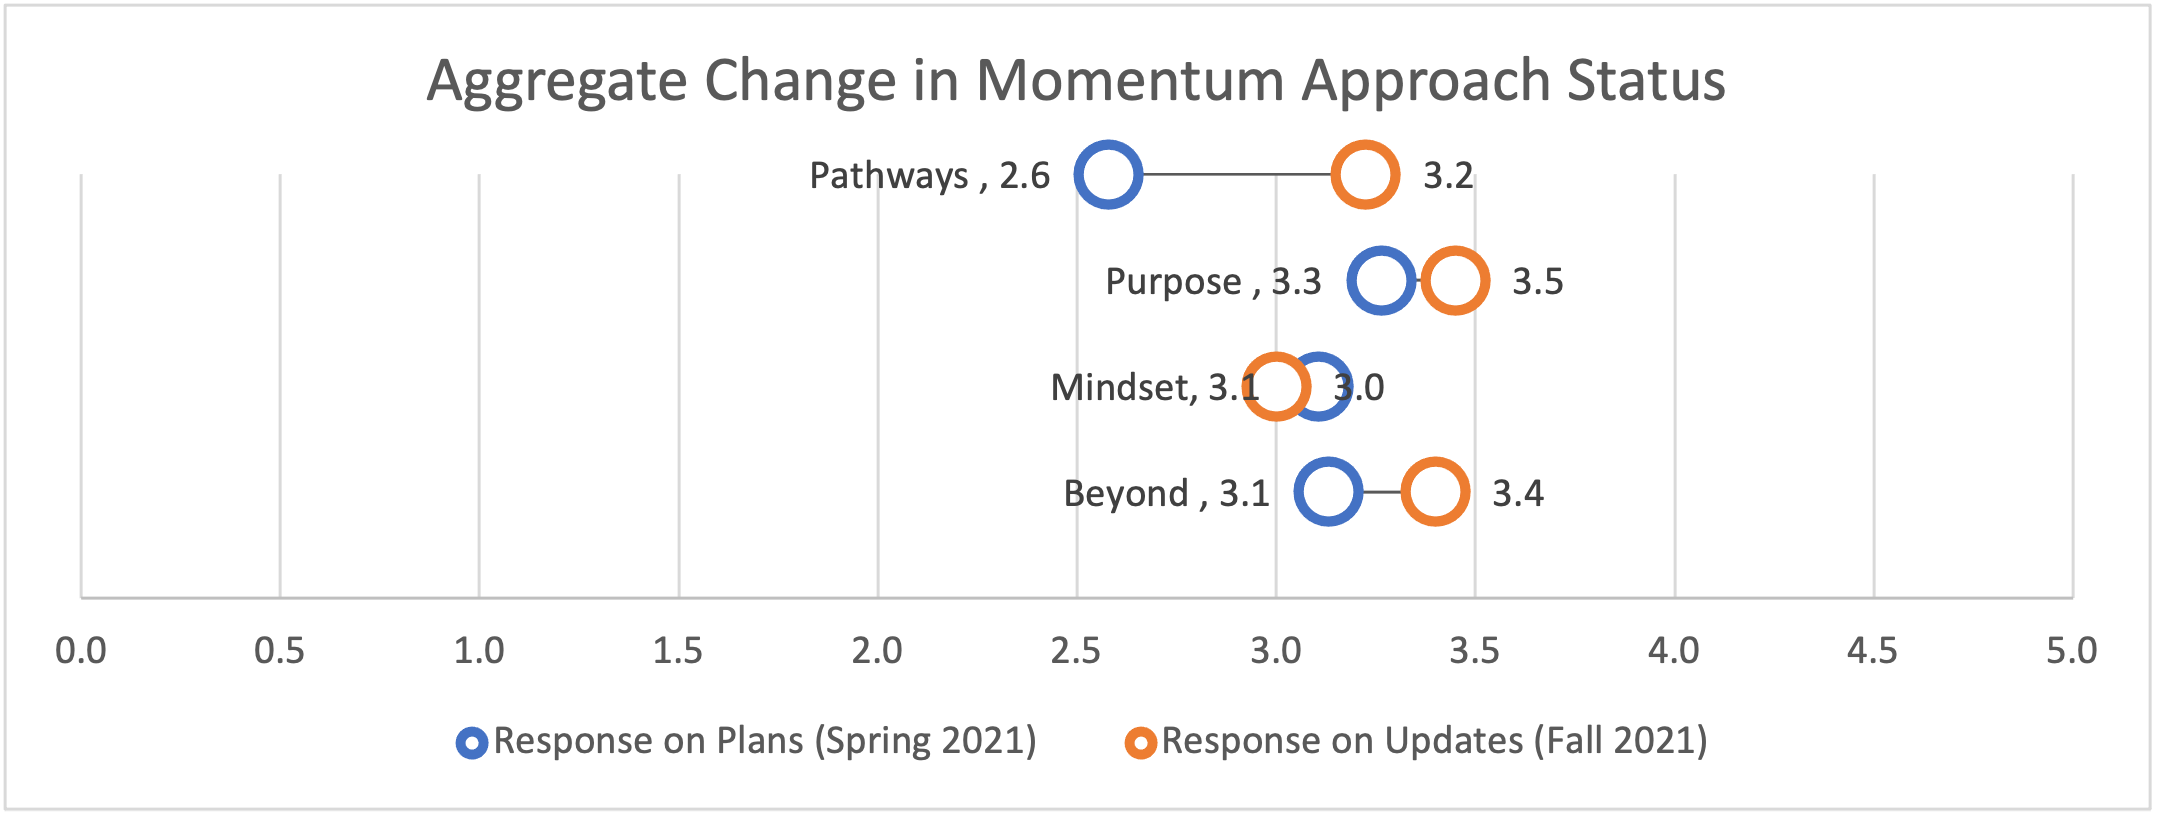 Aggregate Change in Momentum Approach Status